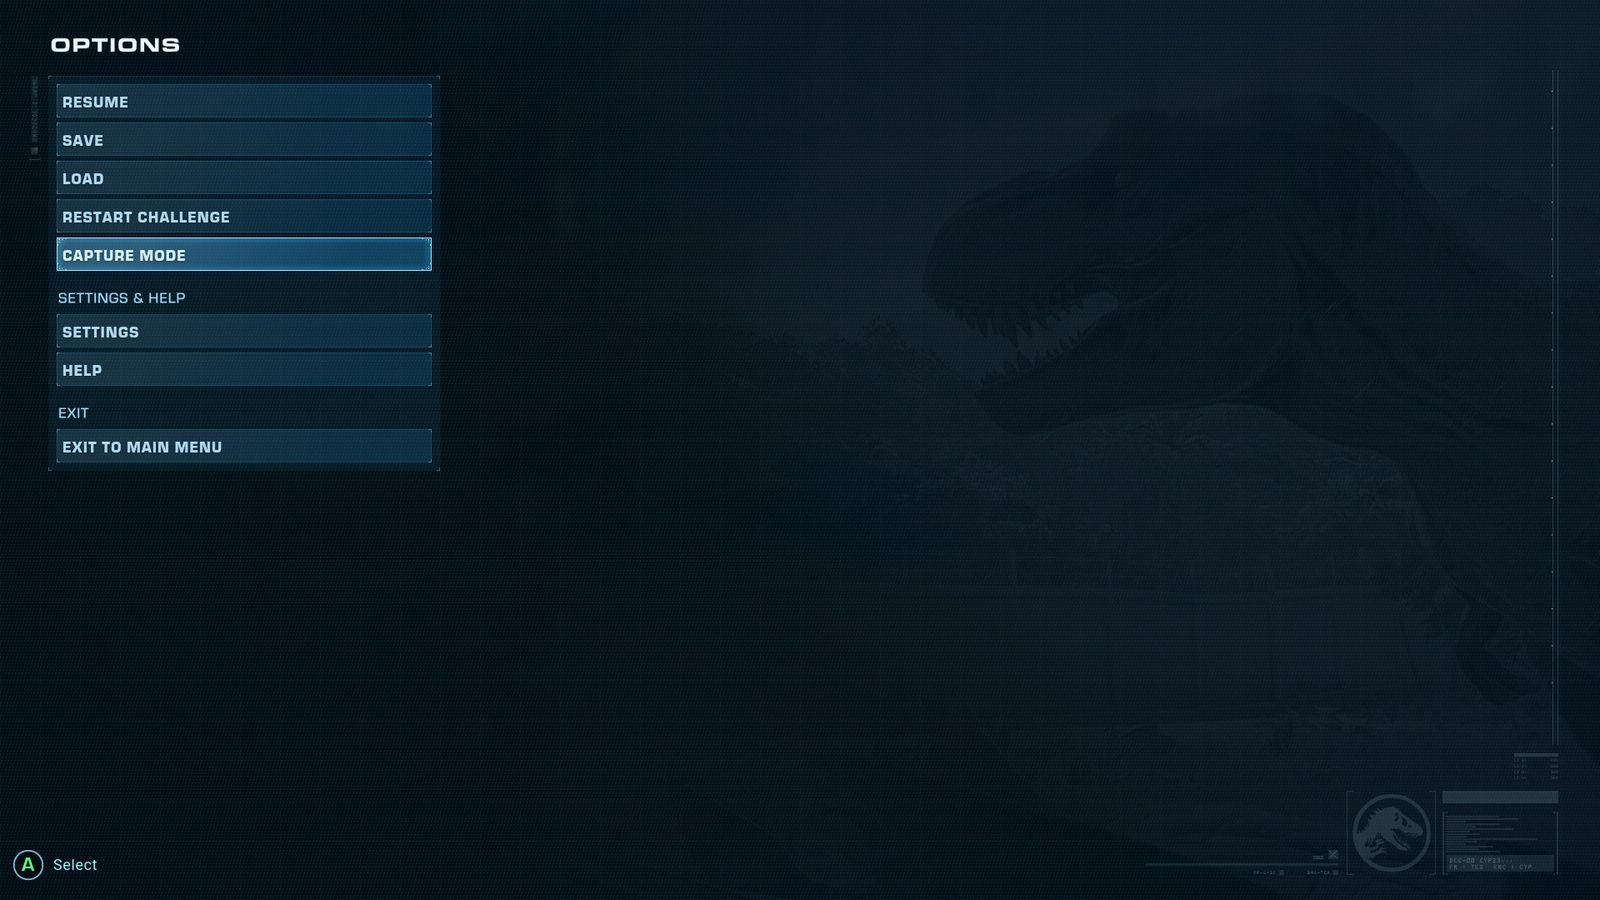 Jurassic World Evolution 2 Pause Menu. The option to enter capture mode has been highlighted.